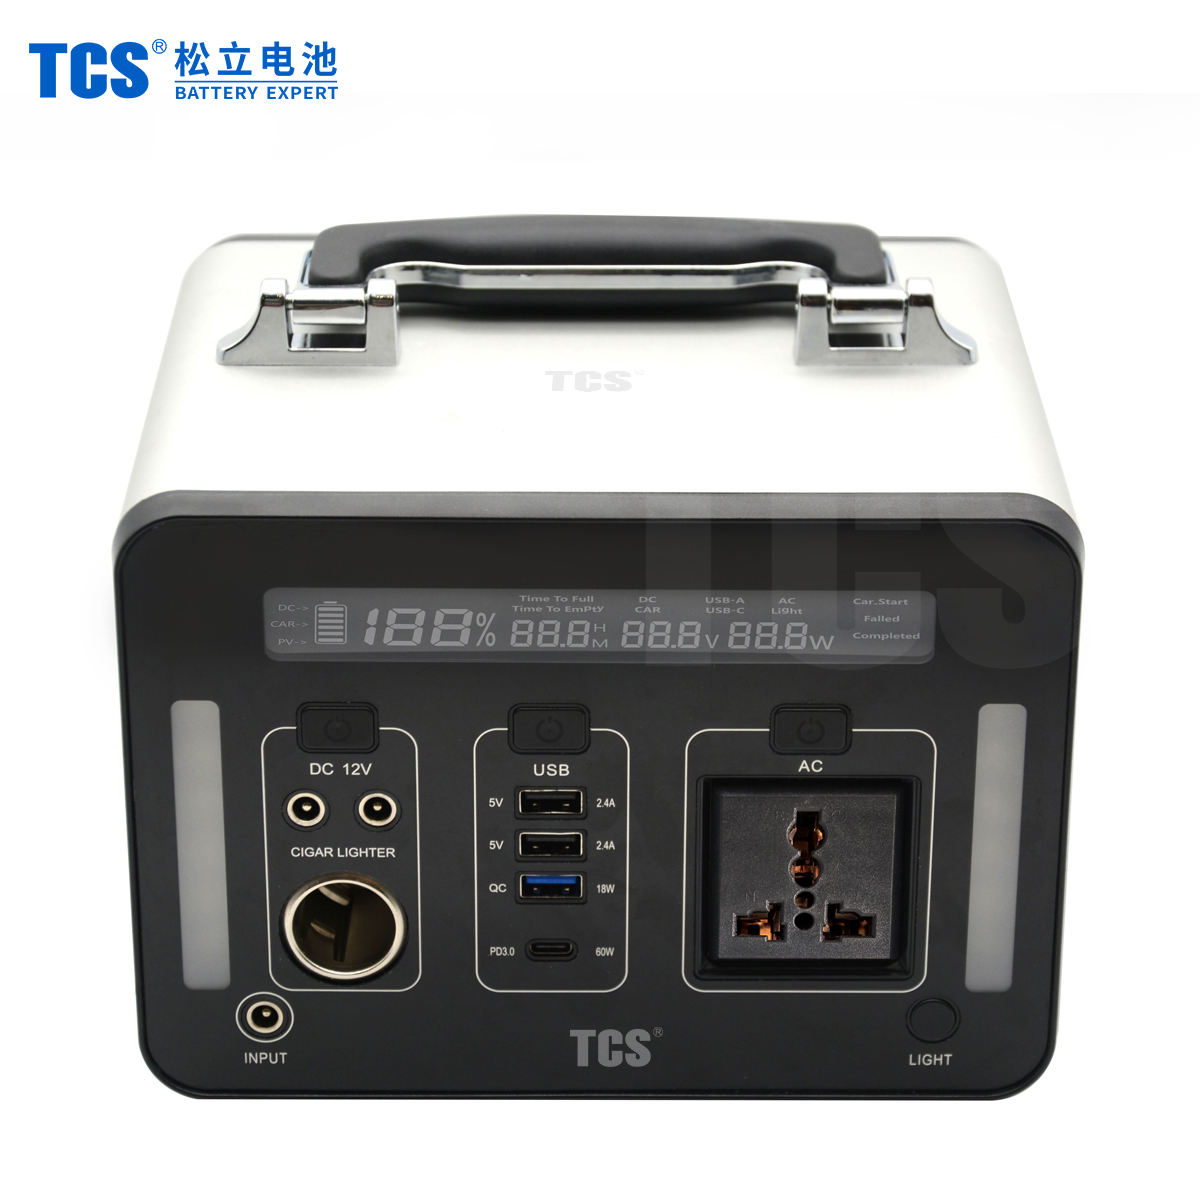 Lithium Battery Portable Power Supply Device T500 TCS Battery